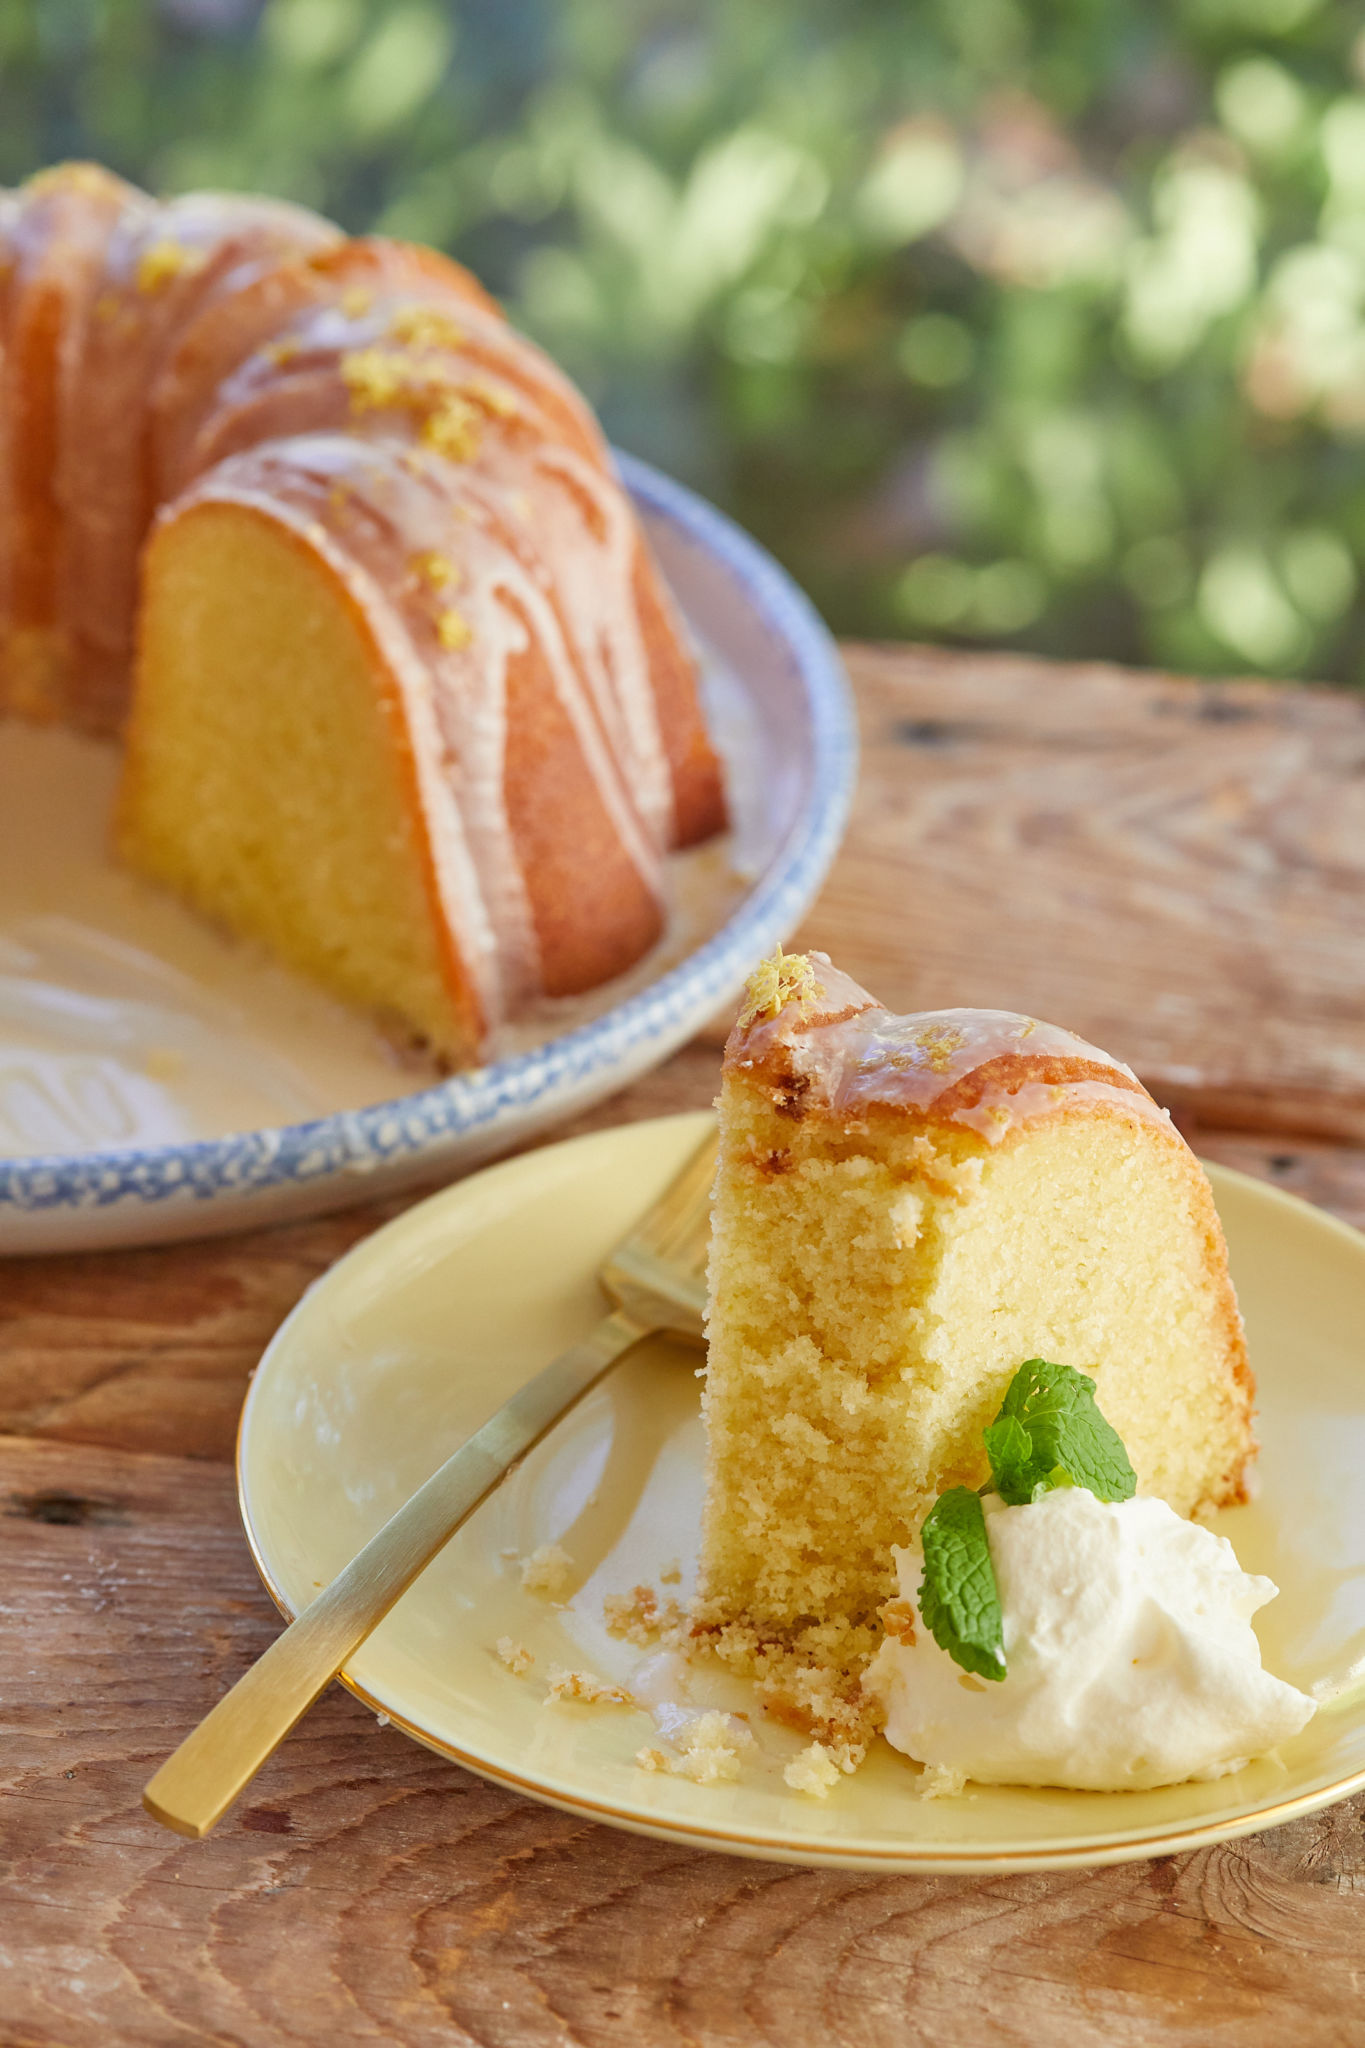 A slice of lemon pound cake next to a dollop of fresh whipped cream.